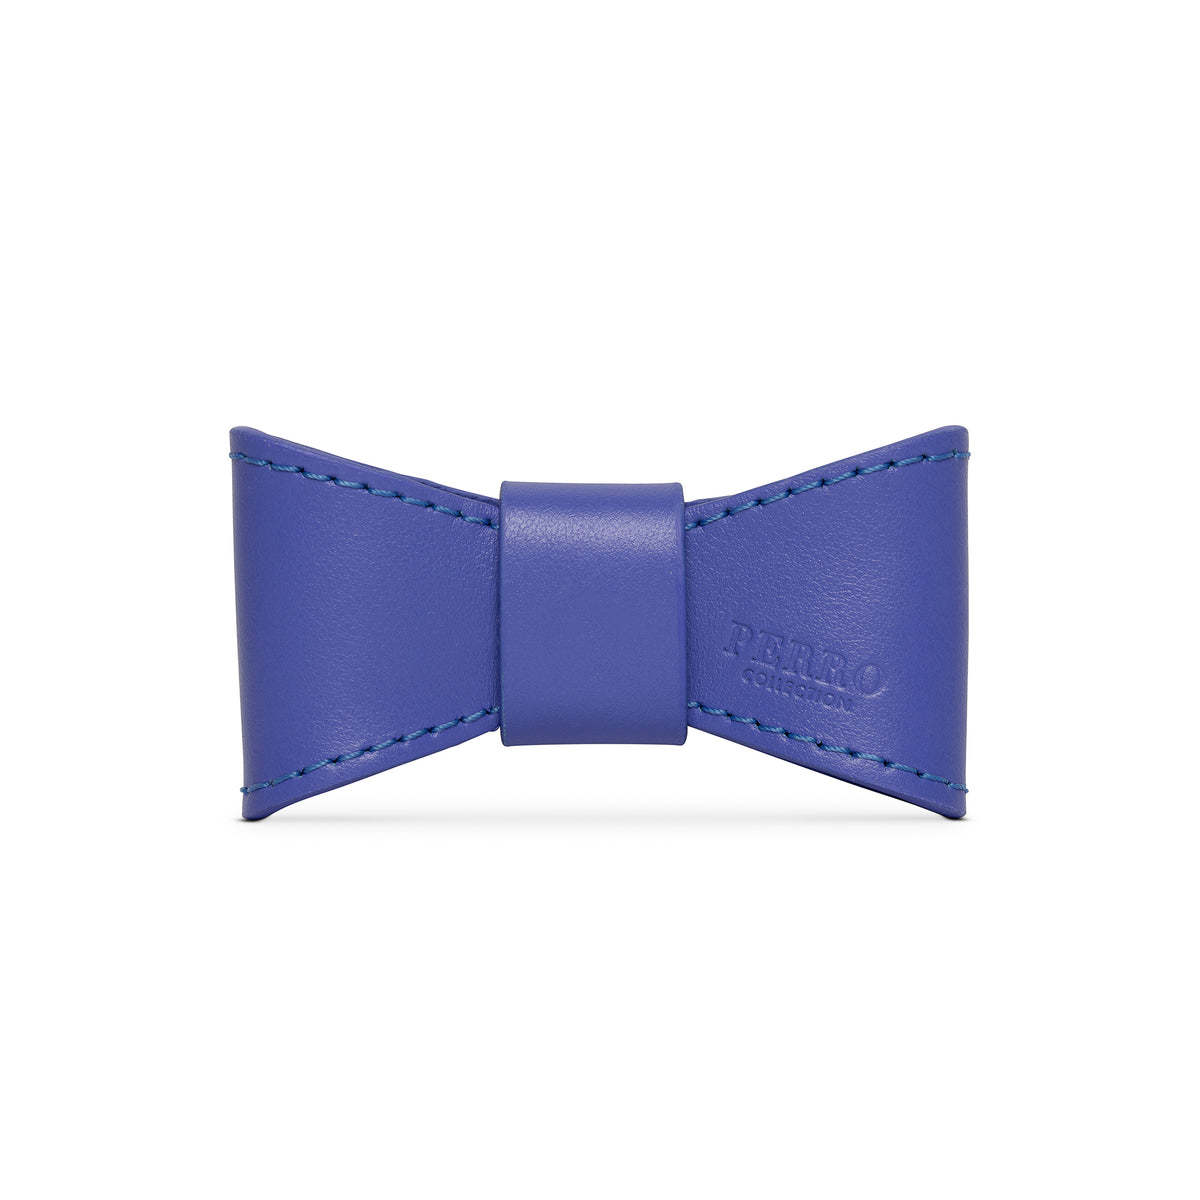 Limited edition Bowtie